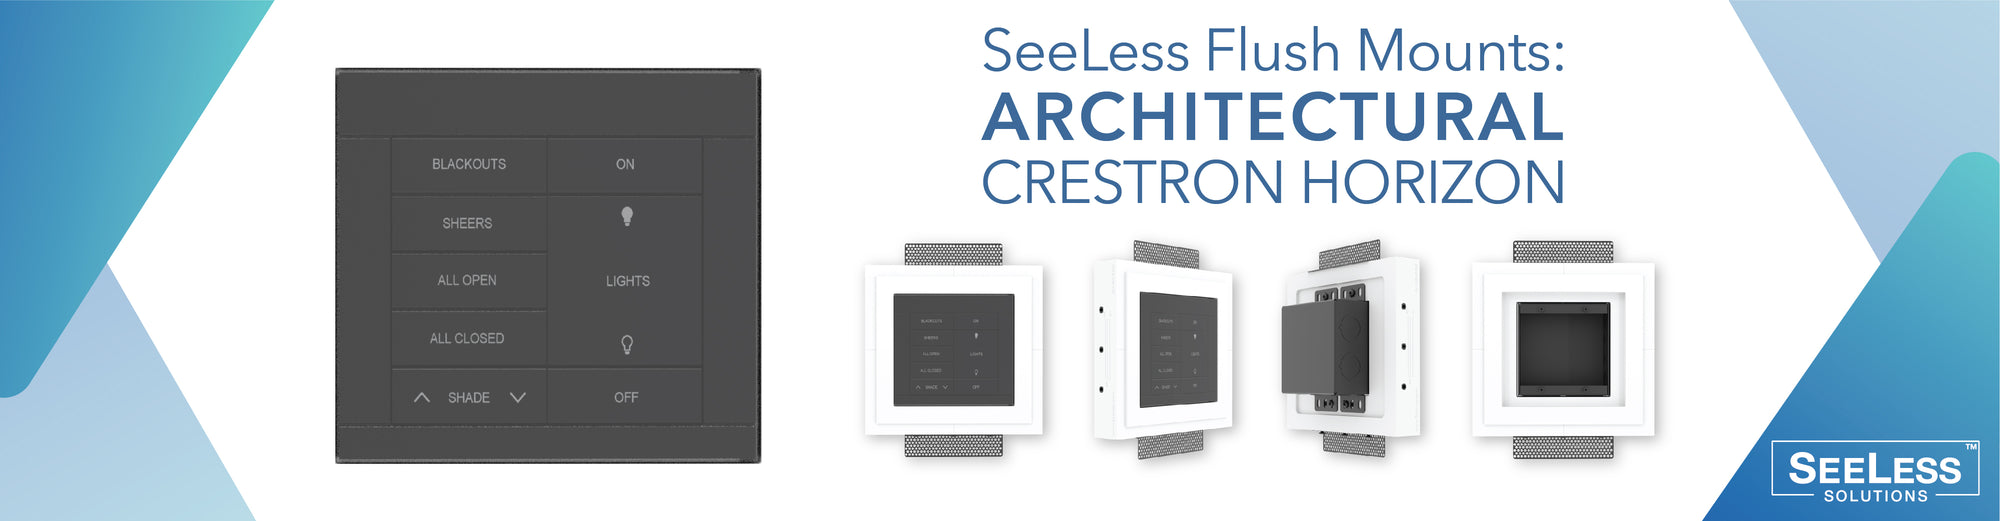 SeeLess Crestron Horizon single and double gang mud-in mounts